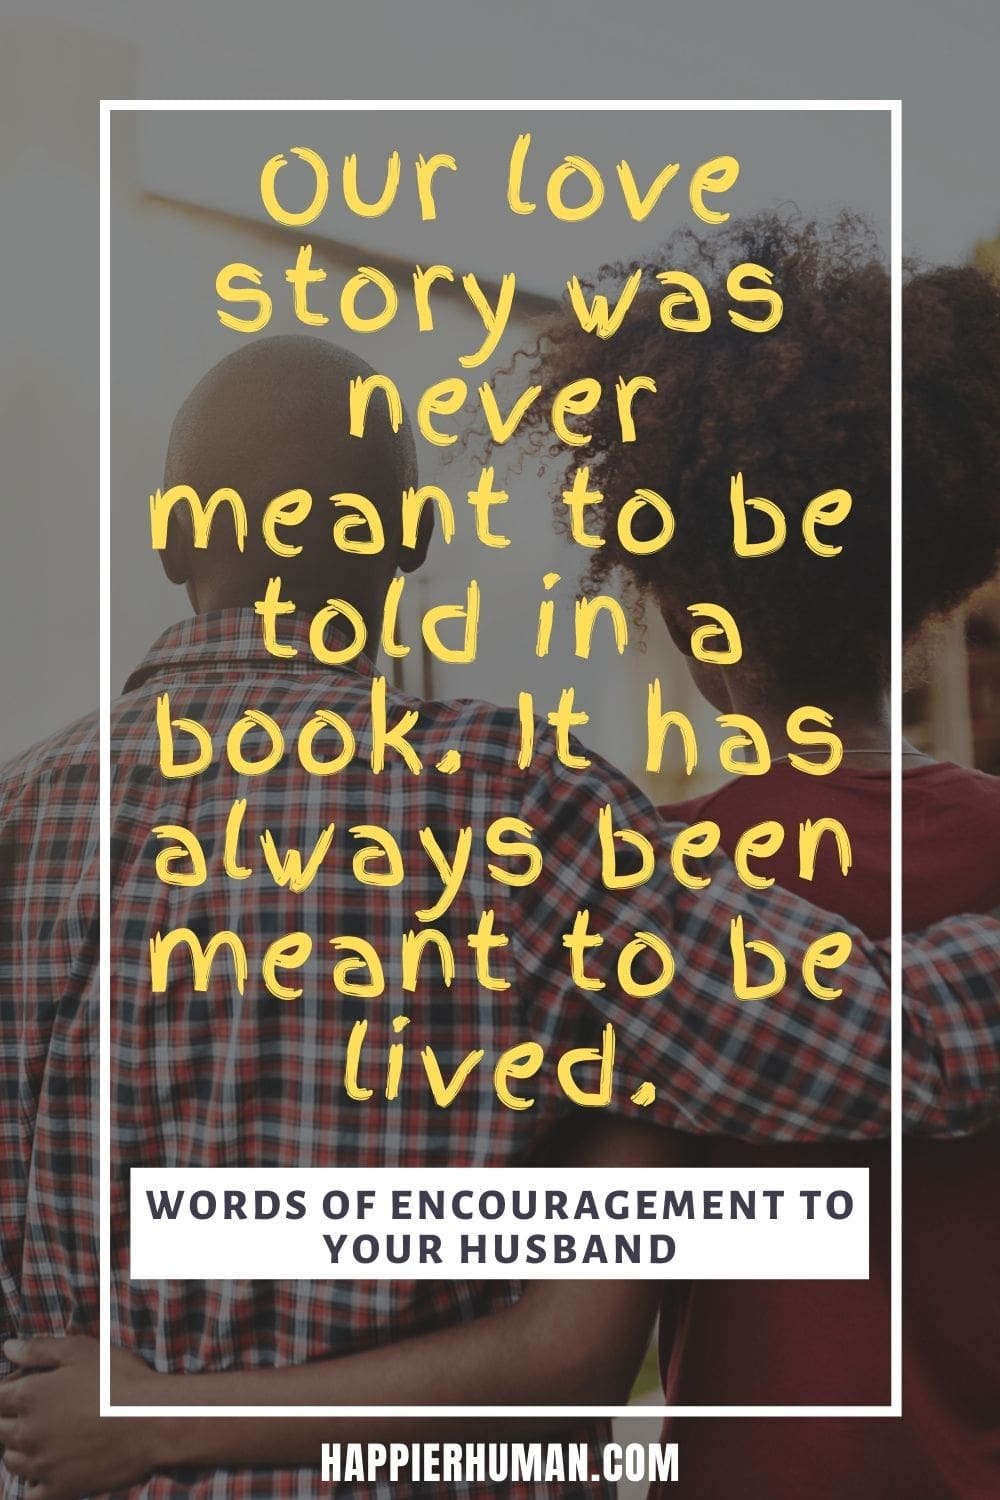 Words of Encouragement for Husbands - Our love story was never meant to be told in a book. It has always been meant to be lived. | words of affirmation for him | words of wisdom to my husband | letter of encouragement to husband